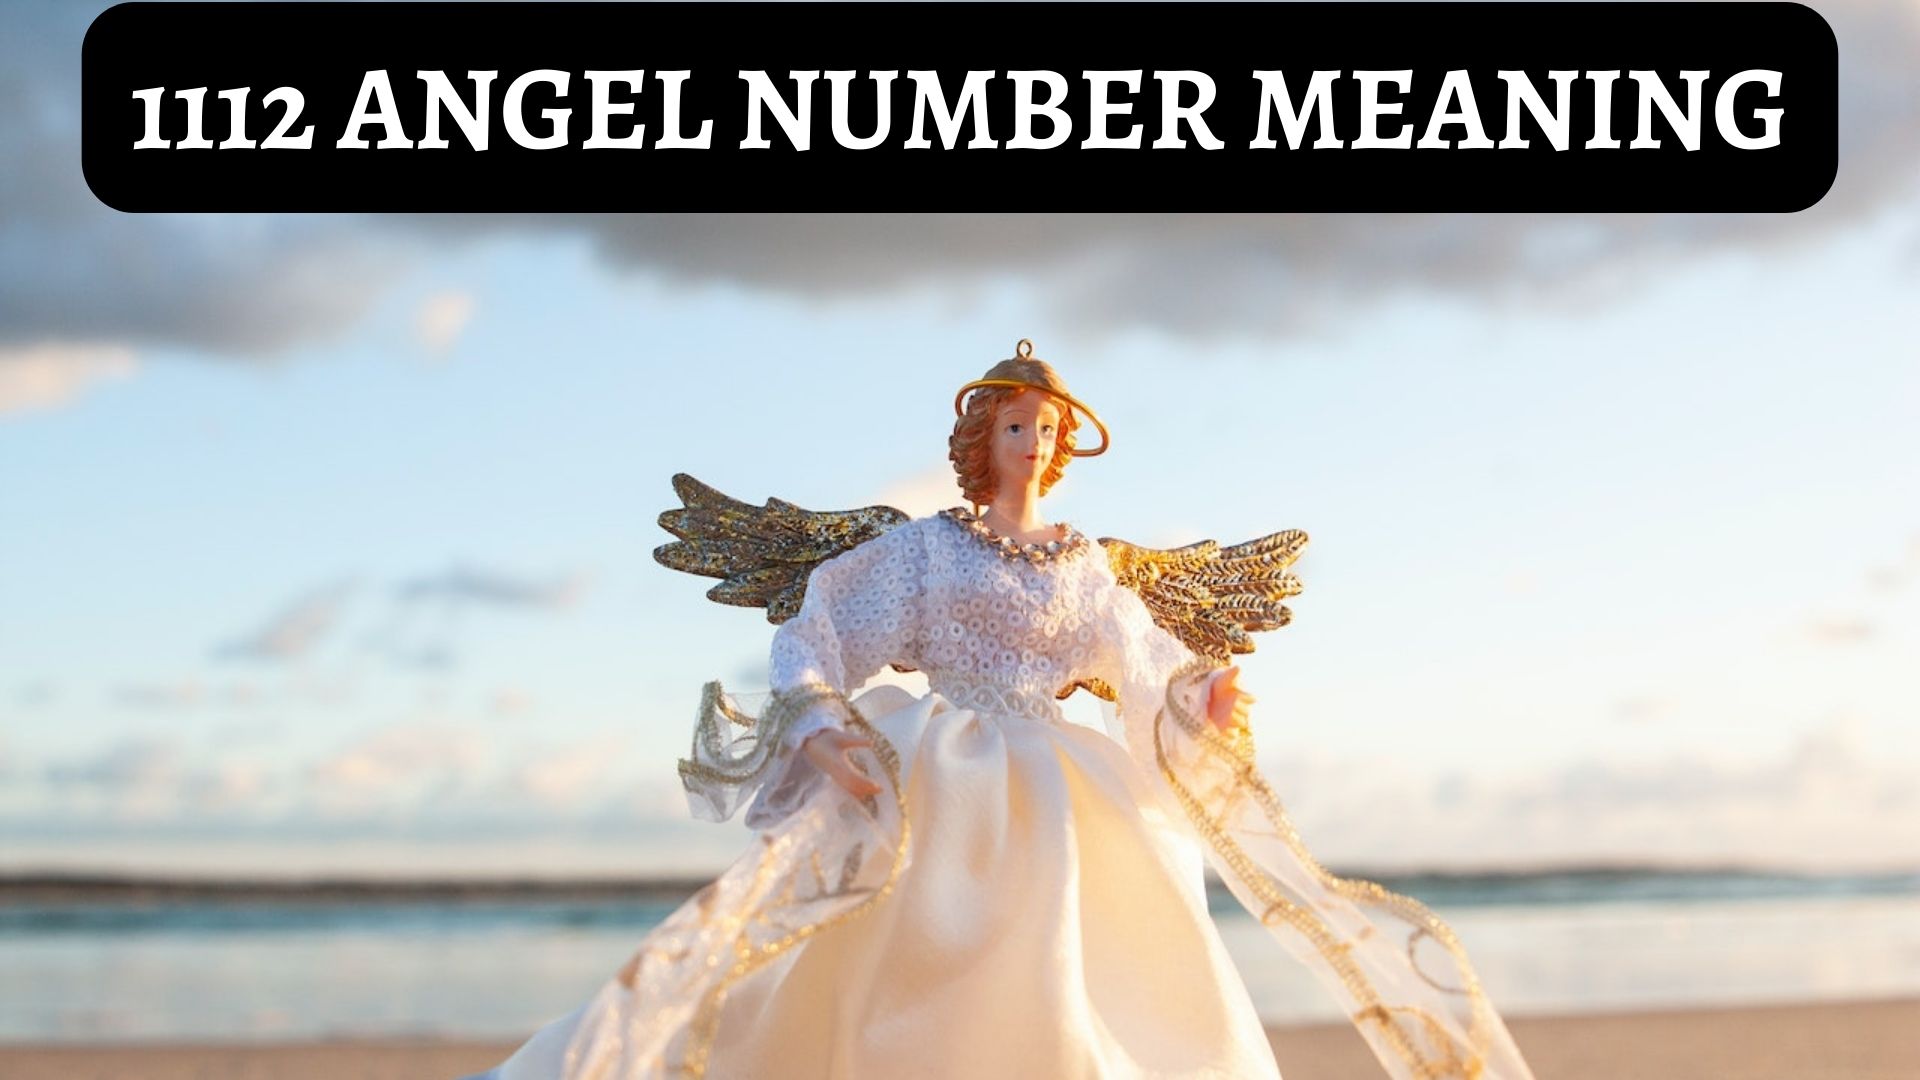 1112 Angel Number Meaning - Symbolism And Meaning